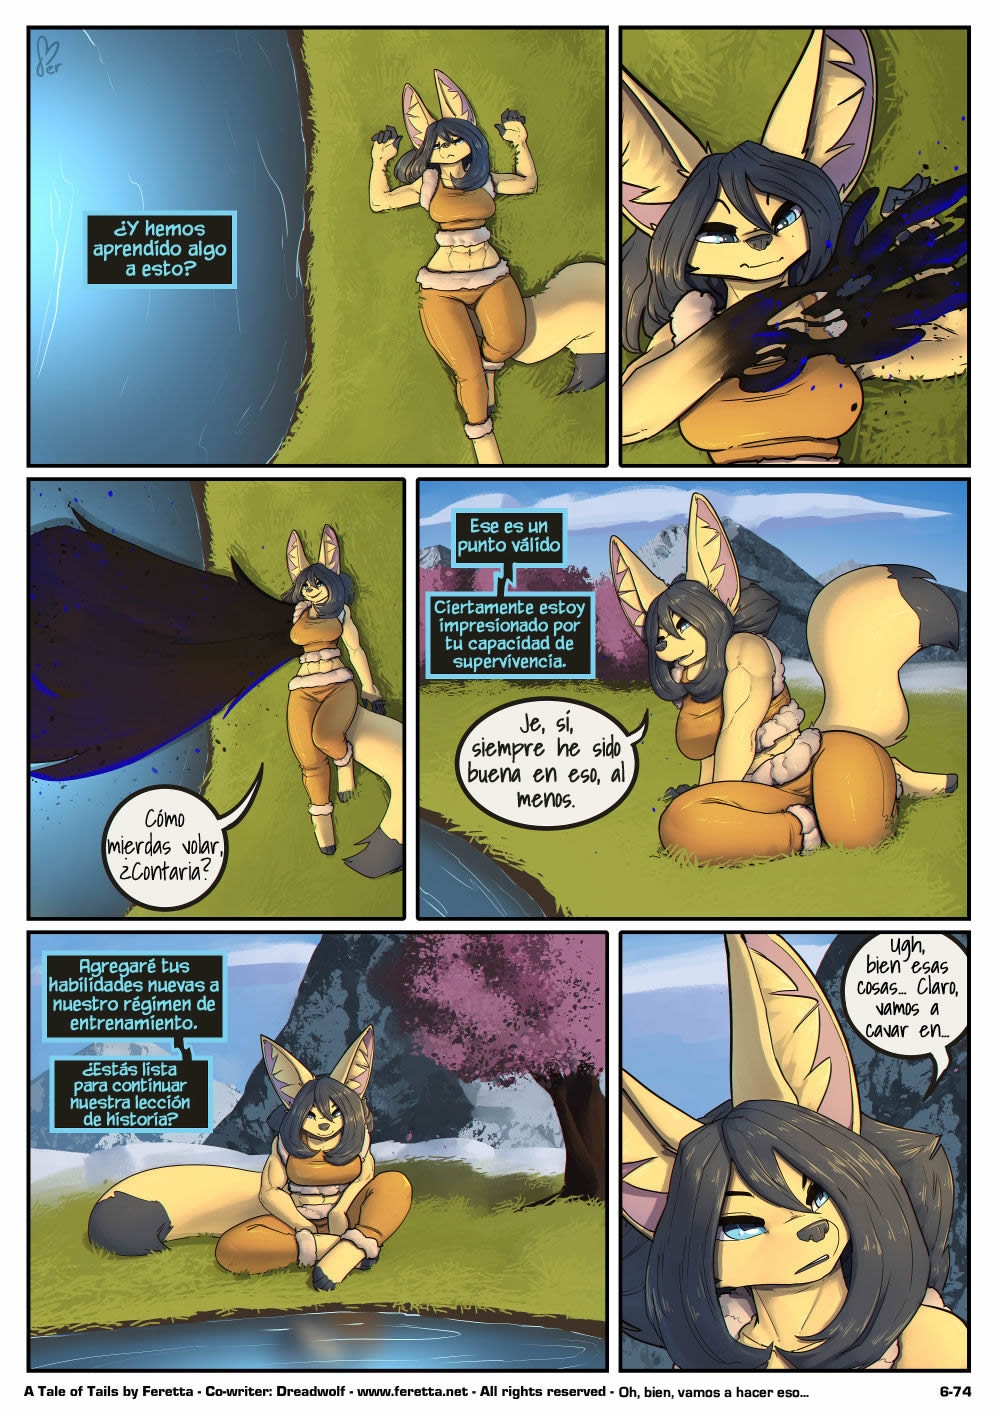 [Feretta] A Tale of Tails: Chapter 6 - Paths converge / Los caminos convergen [Spanish] [Red Fox Makkan] 74